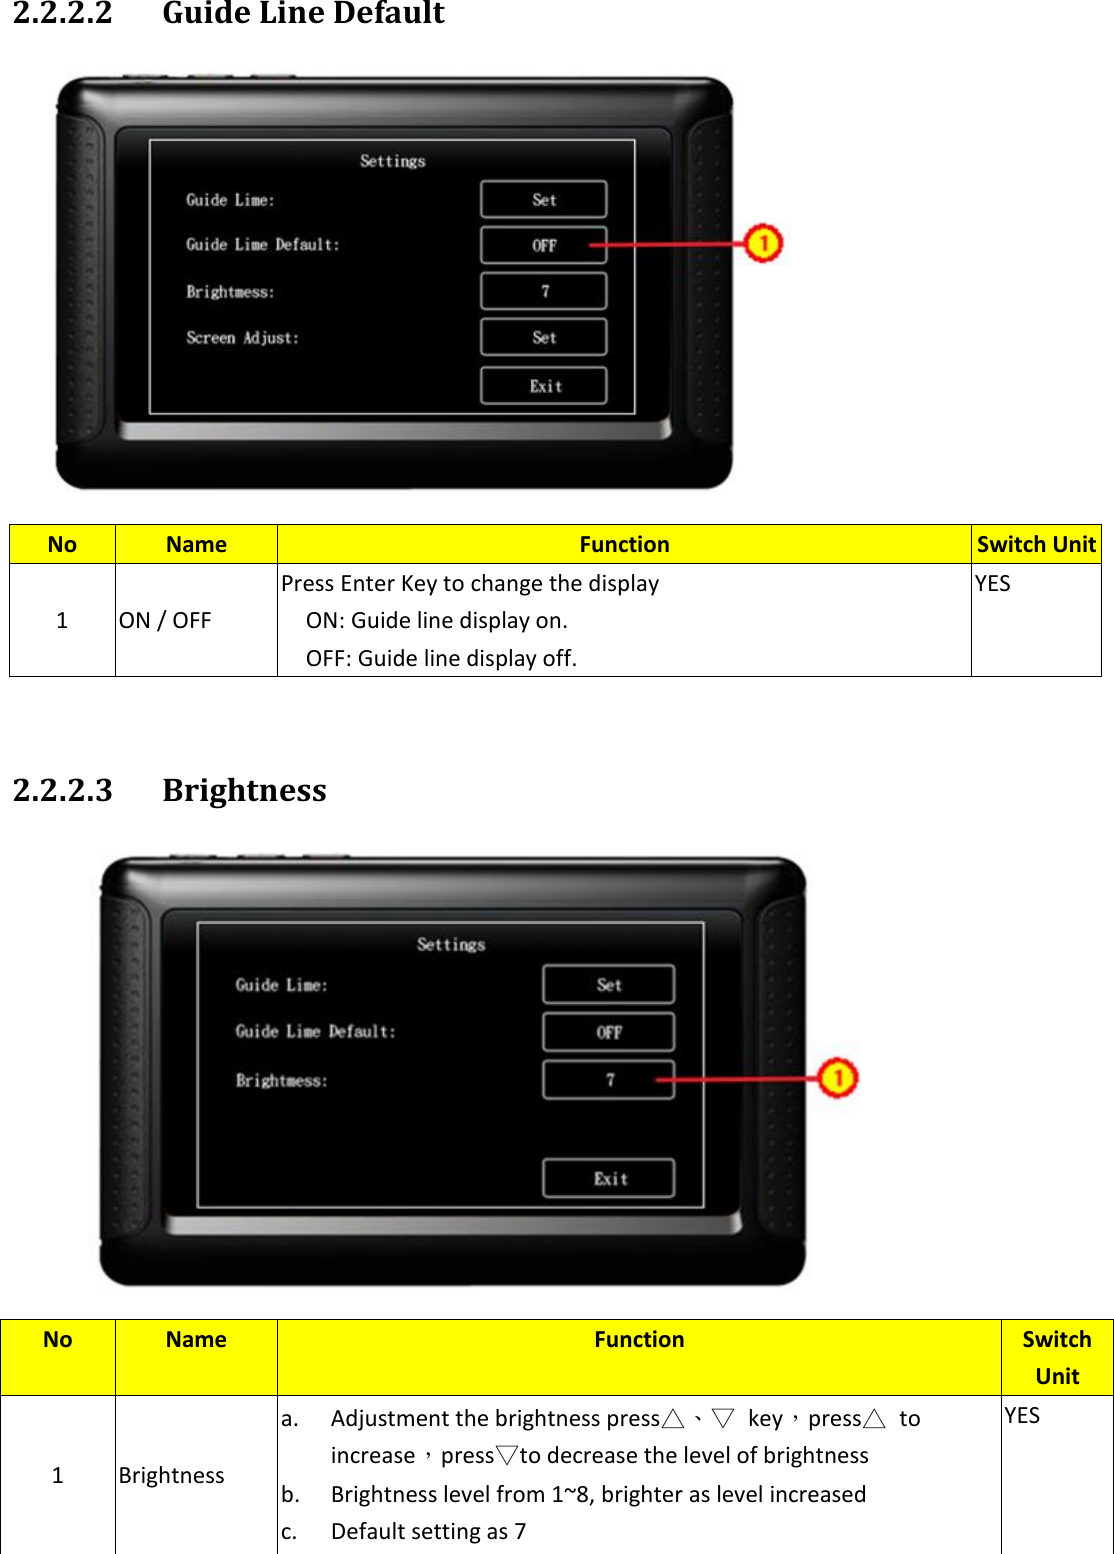  2.2.2.2  Guide Line Default               2.2.2.3  Brightness              No Name Function Switch Unit 1 ON / OFF Press Enter Key to change the display   ON: Guide line display on.     OFF: Guide line display off. YES No Name Function Switch Unit 1 Brightness a. Adjustment the brightness press△、▽  key，press△  to increase，press▽to decrease the level of brightness b. Brightness level from 1~8, brighter as level increased     c. Default setting as 7 YES 